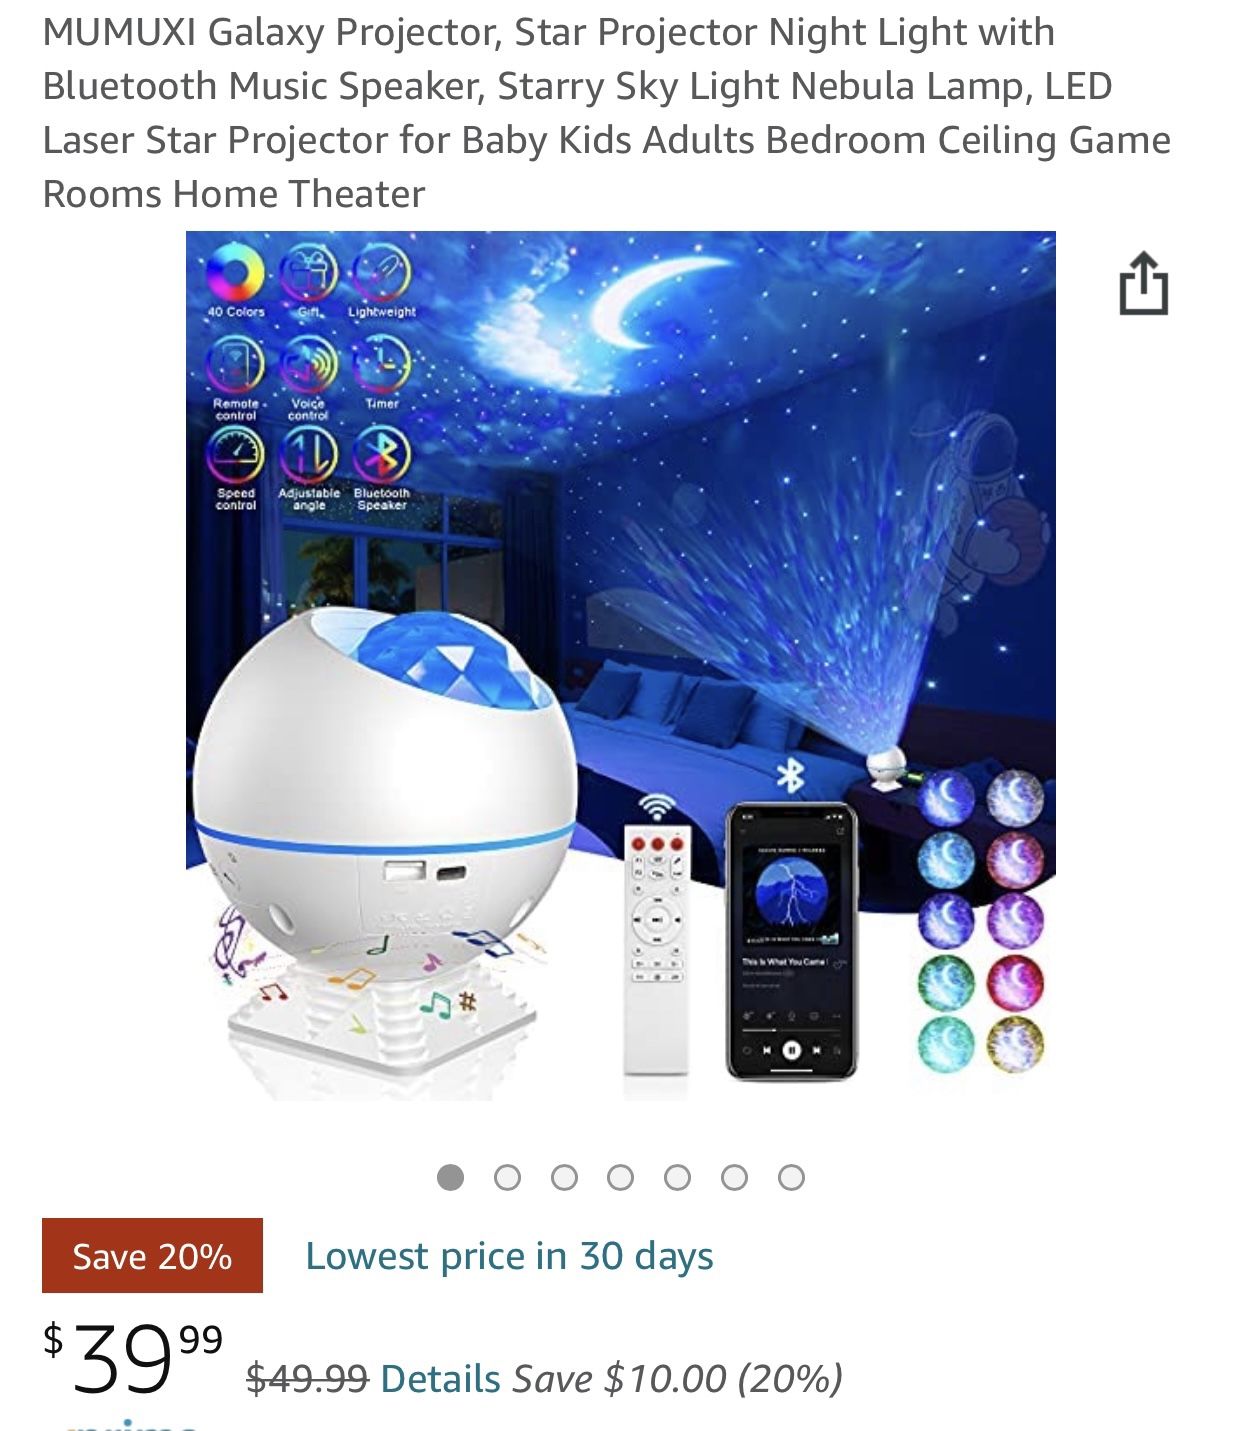 Galaxy Projector, Star Projector Night Light with Bluetooth Music Speaker, Starry Sky Light Nebula Lamp, LED Laser Star Projector for Baby Kids